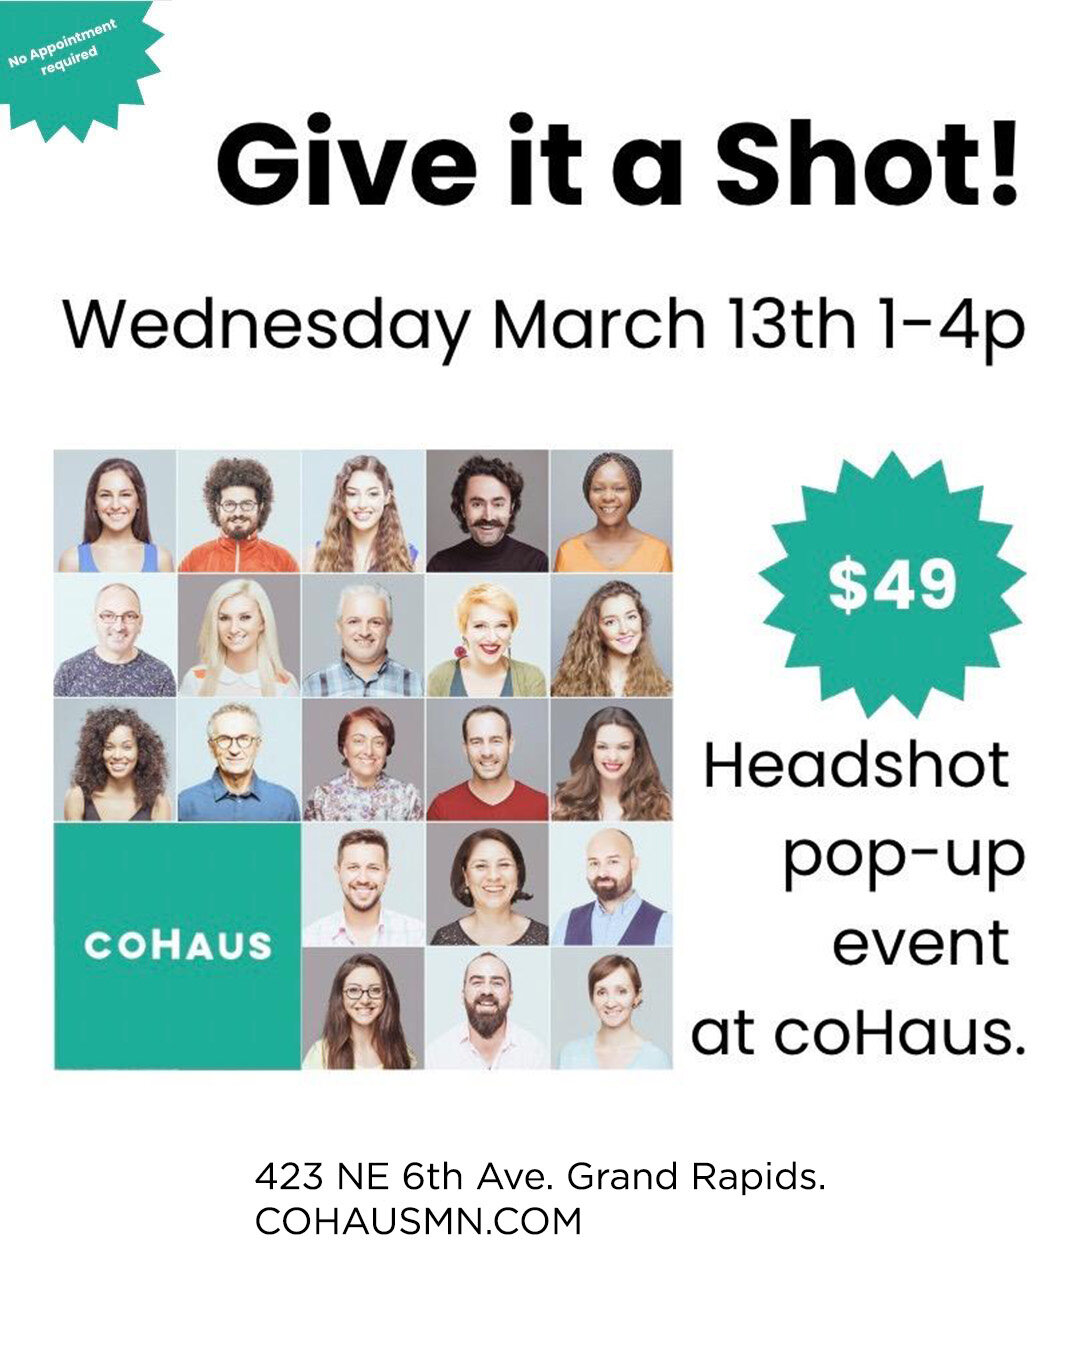 Stop in and say hello and get your head shot taken!